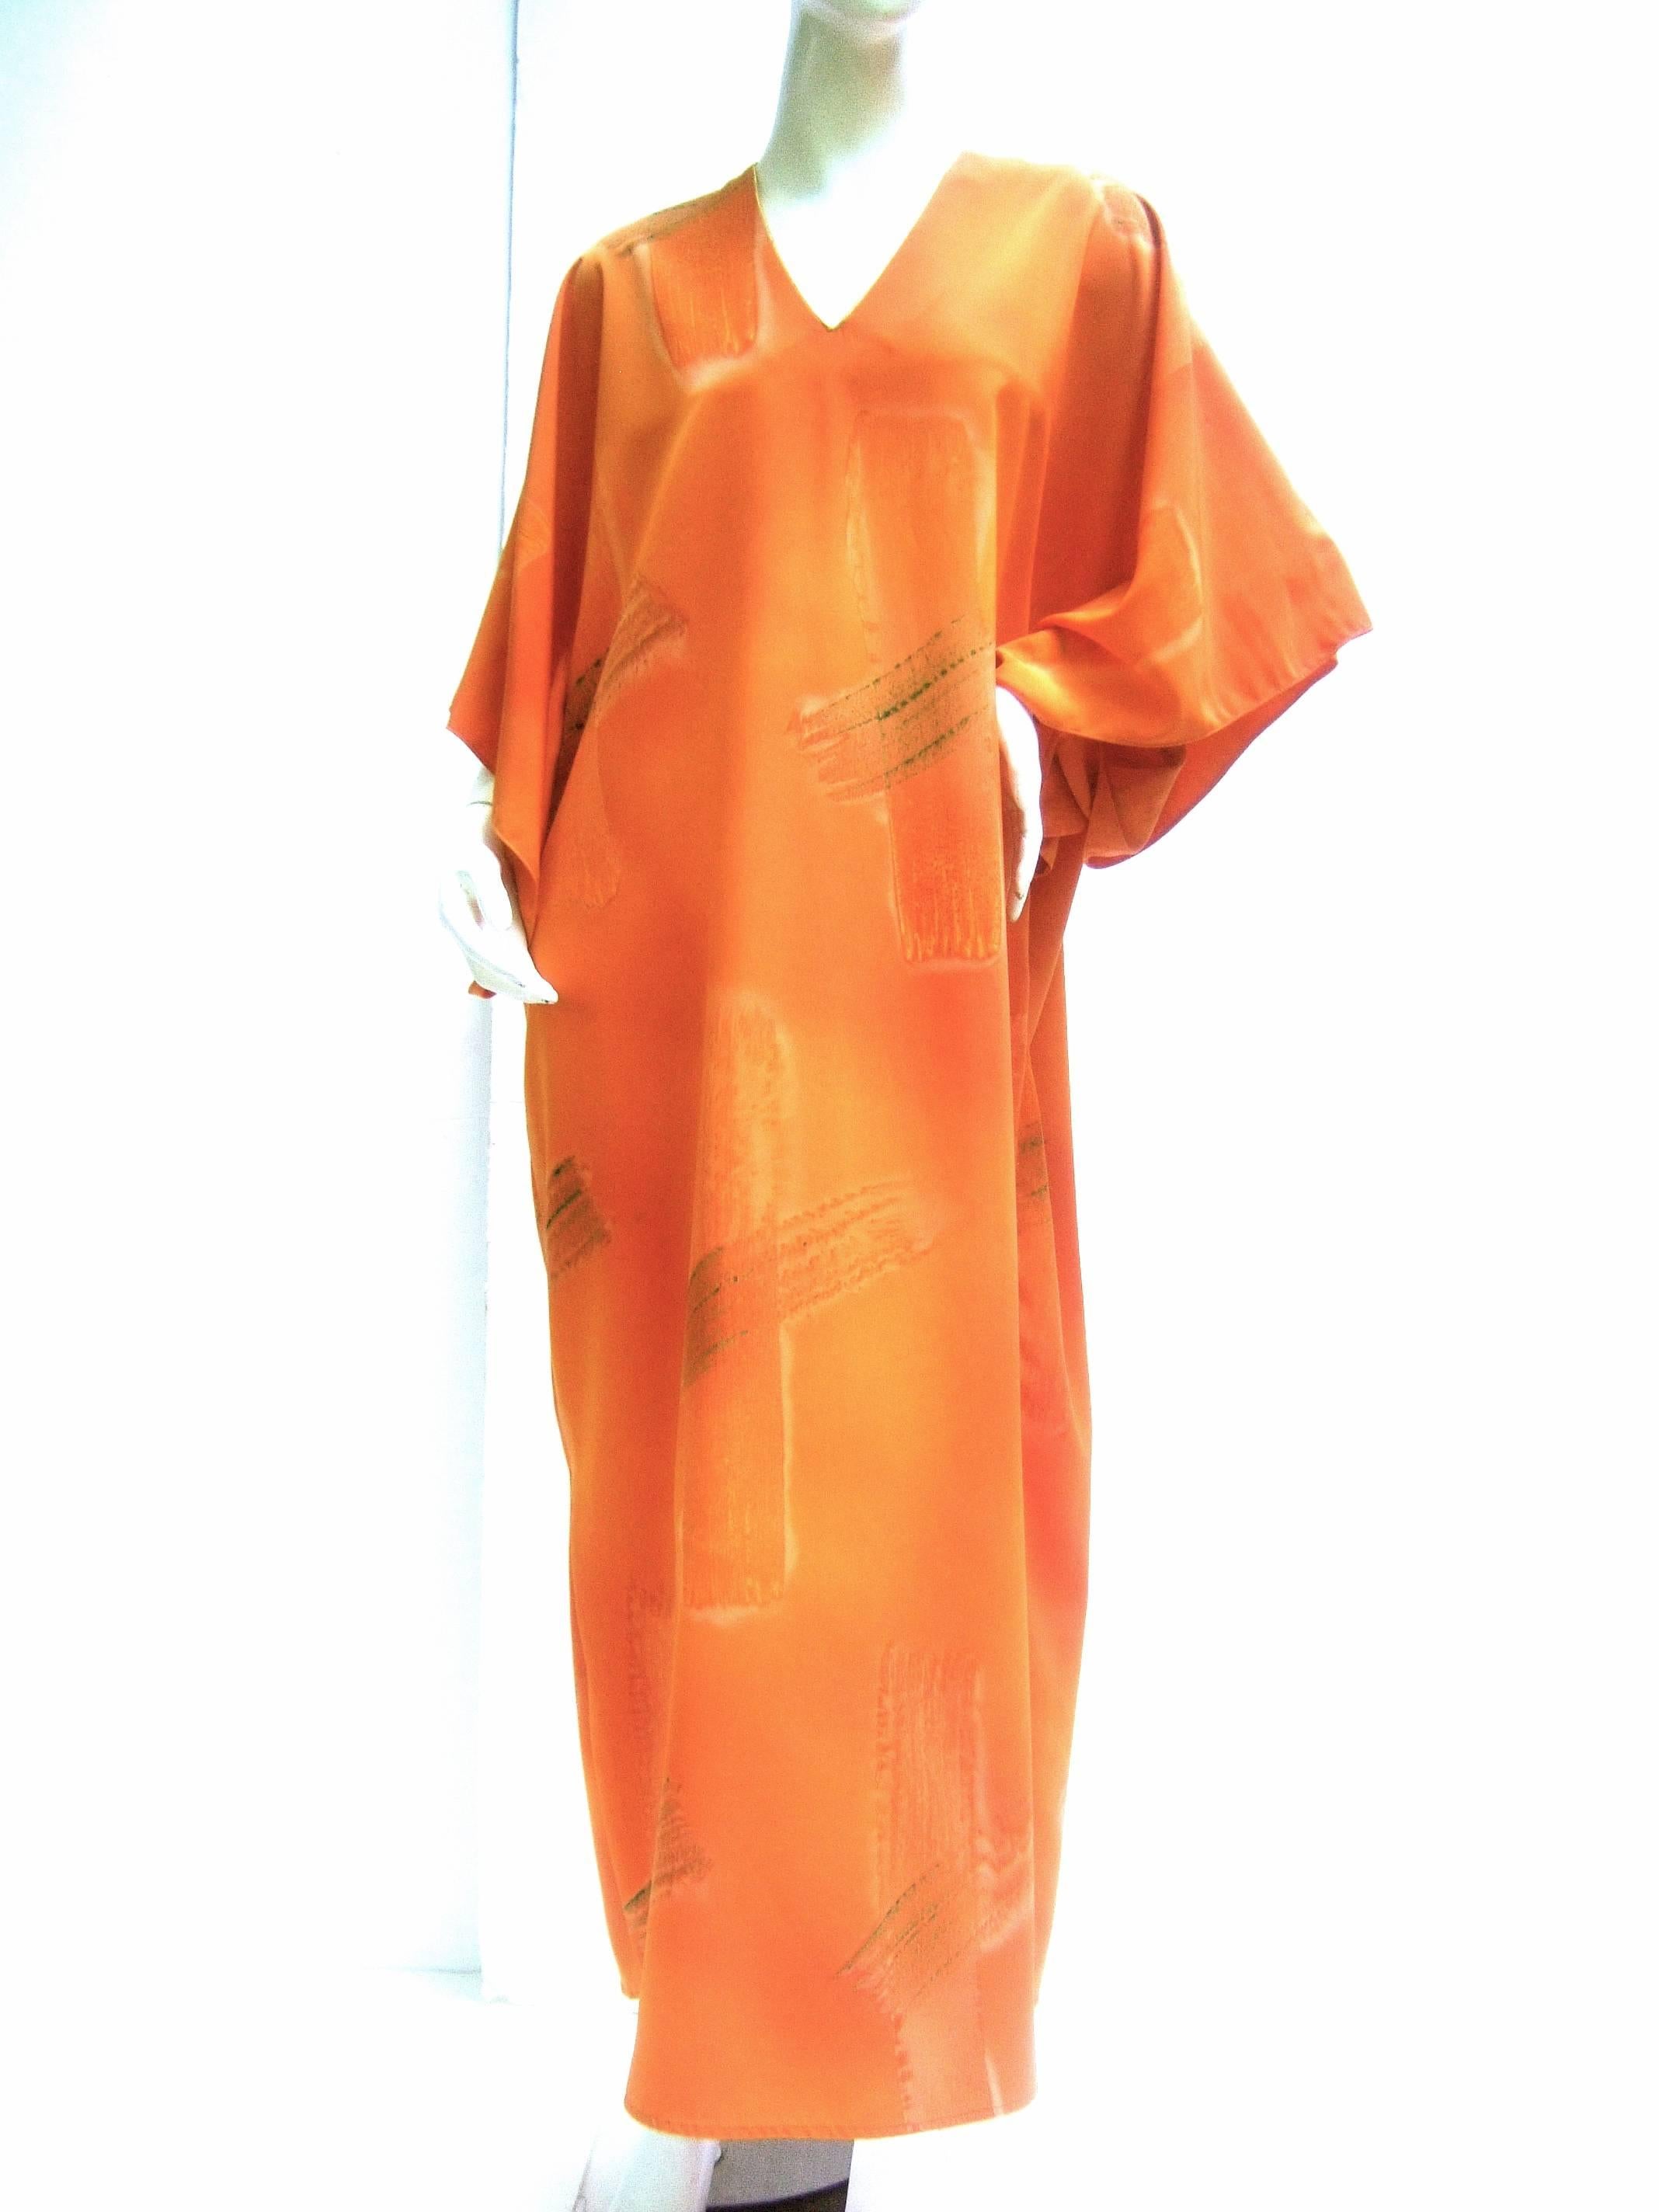 ***RESERVED SALE PENDING FOR ANNE***


***RESERVED SALE PENDING FOR ANNE***

Vibrant tangerine caftan lounge gown for 
Neiman Marcus c 1990
The crisp citrus color caftan gown is embellished with sporadic  
brush stroke graphics 

The collar is